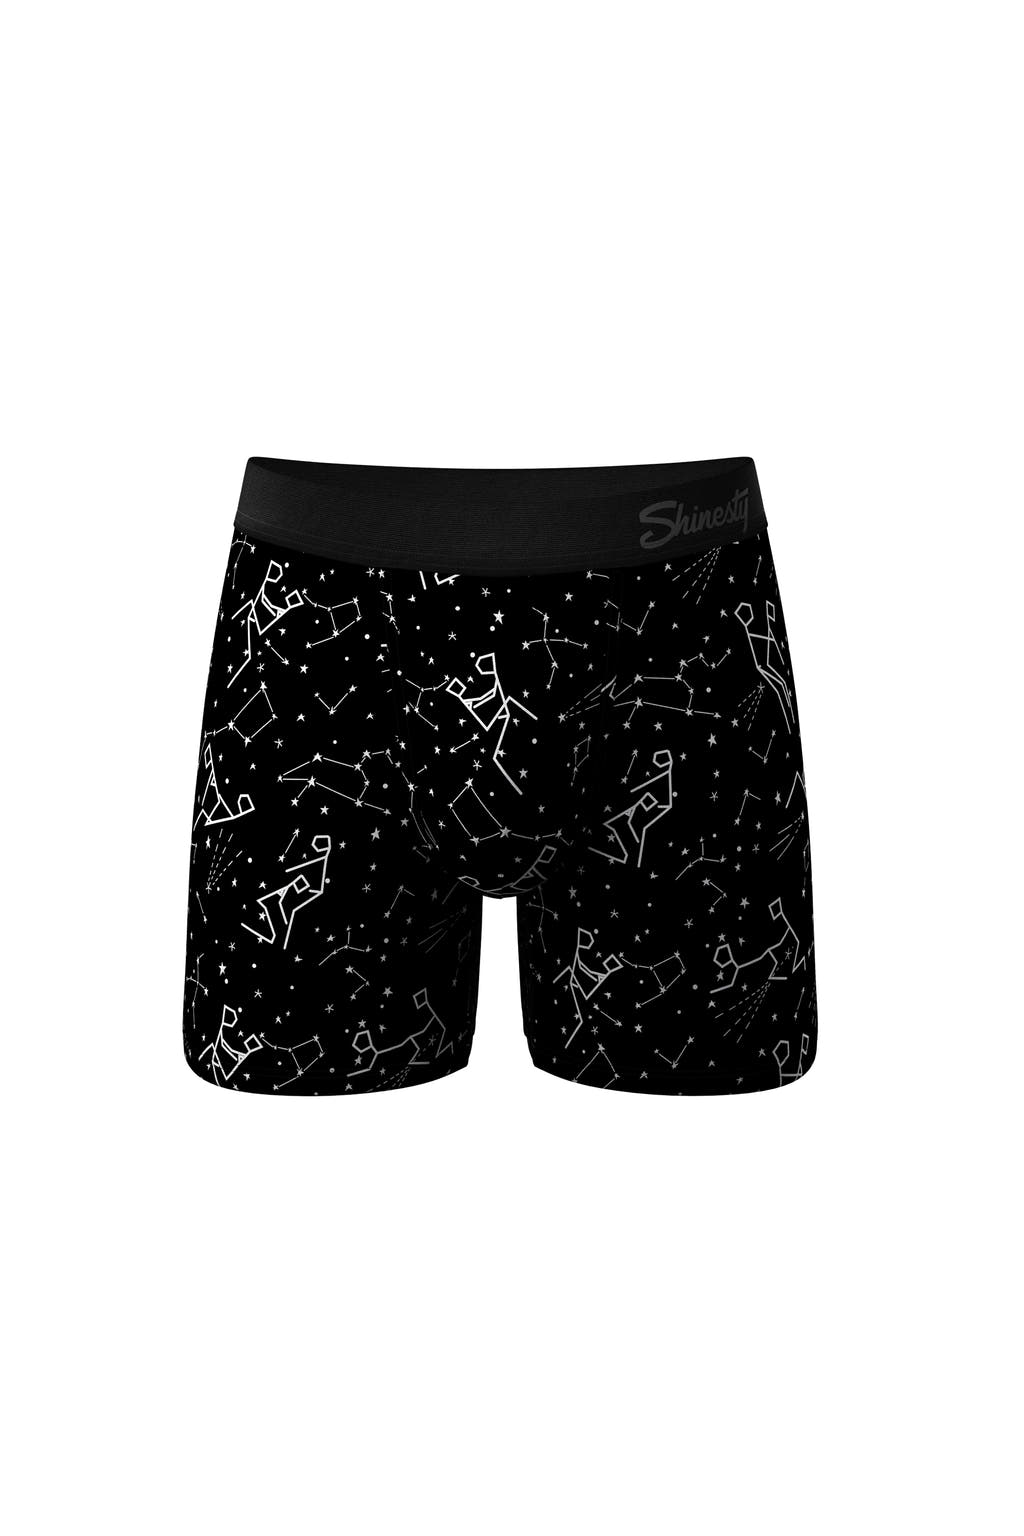 constellation funny boxers for men